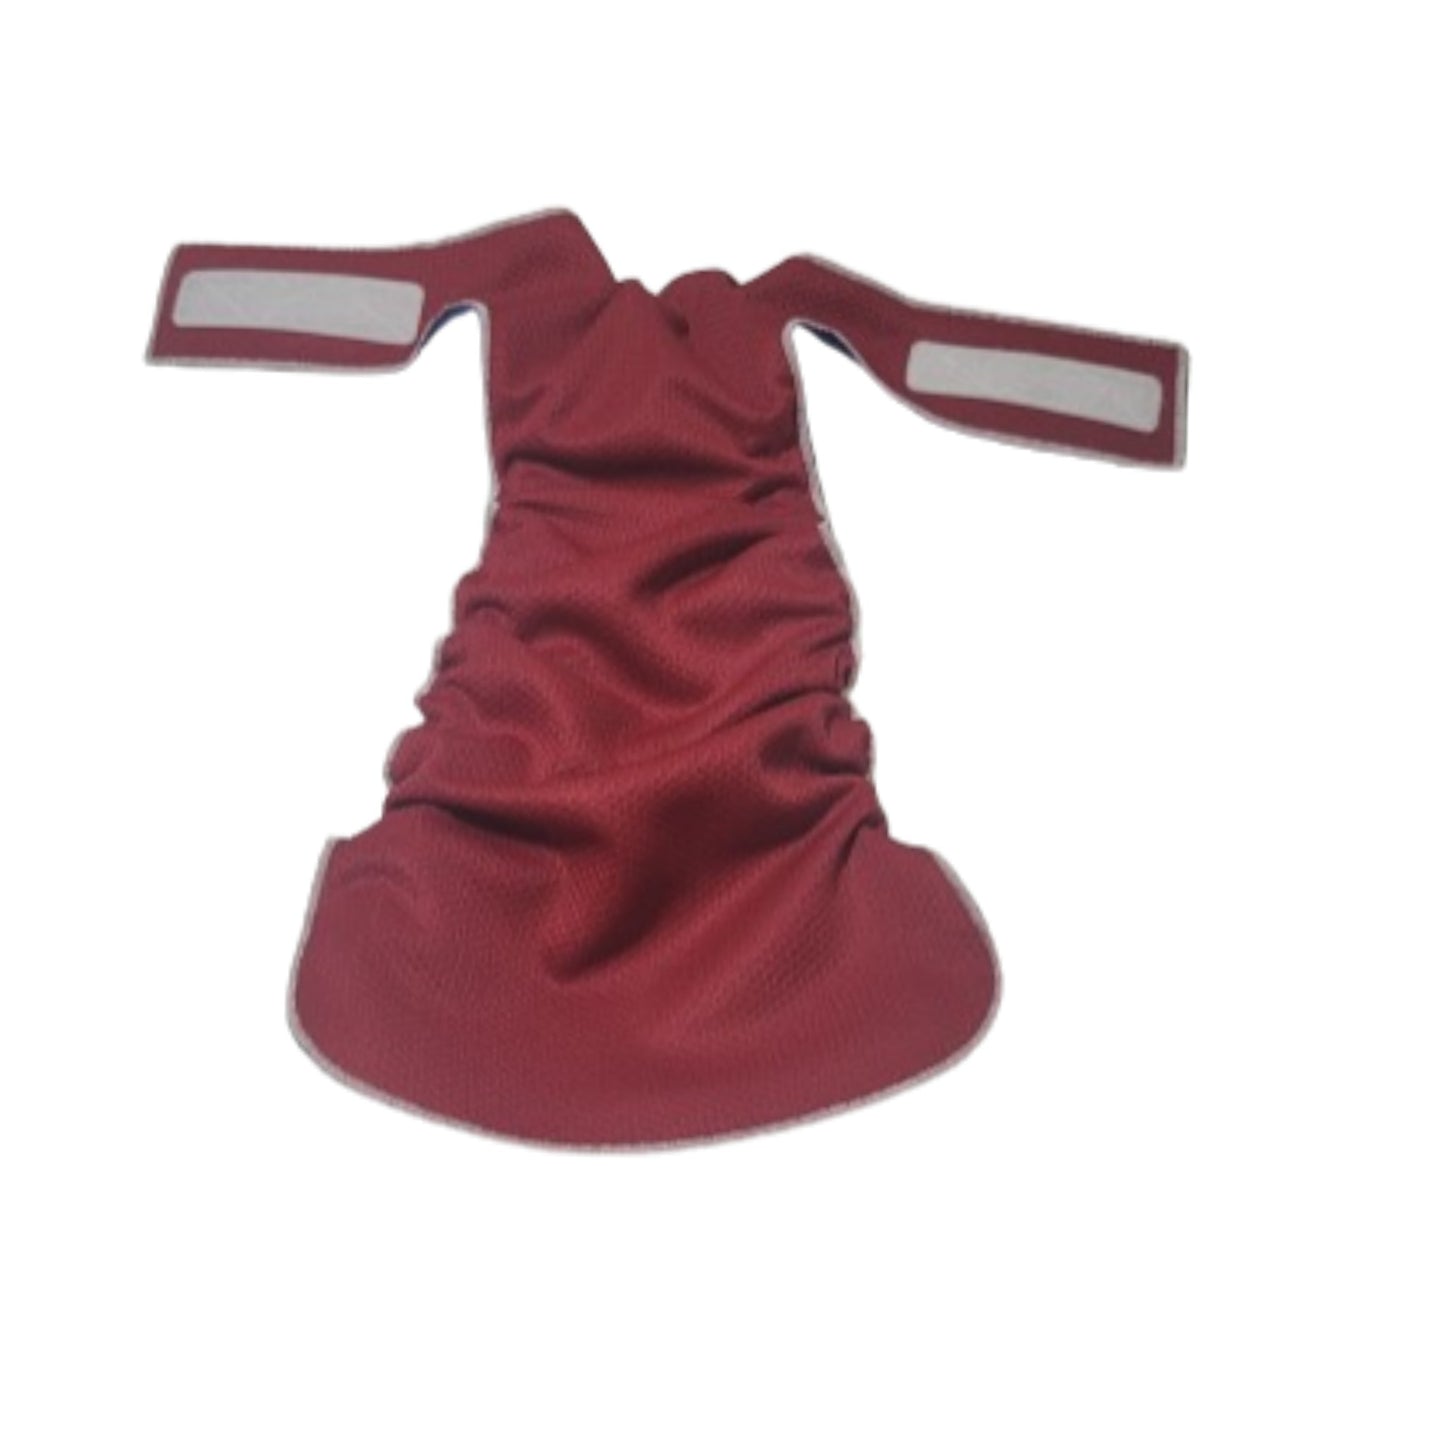 Female Dog Diaper - Britches - Without Tail Opening – Burgundy